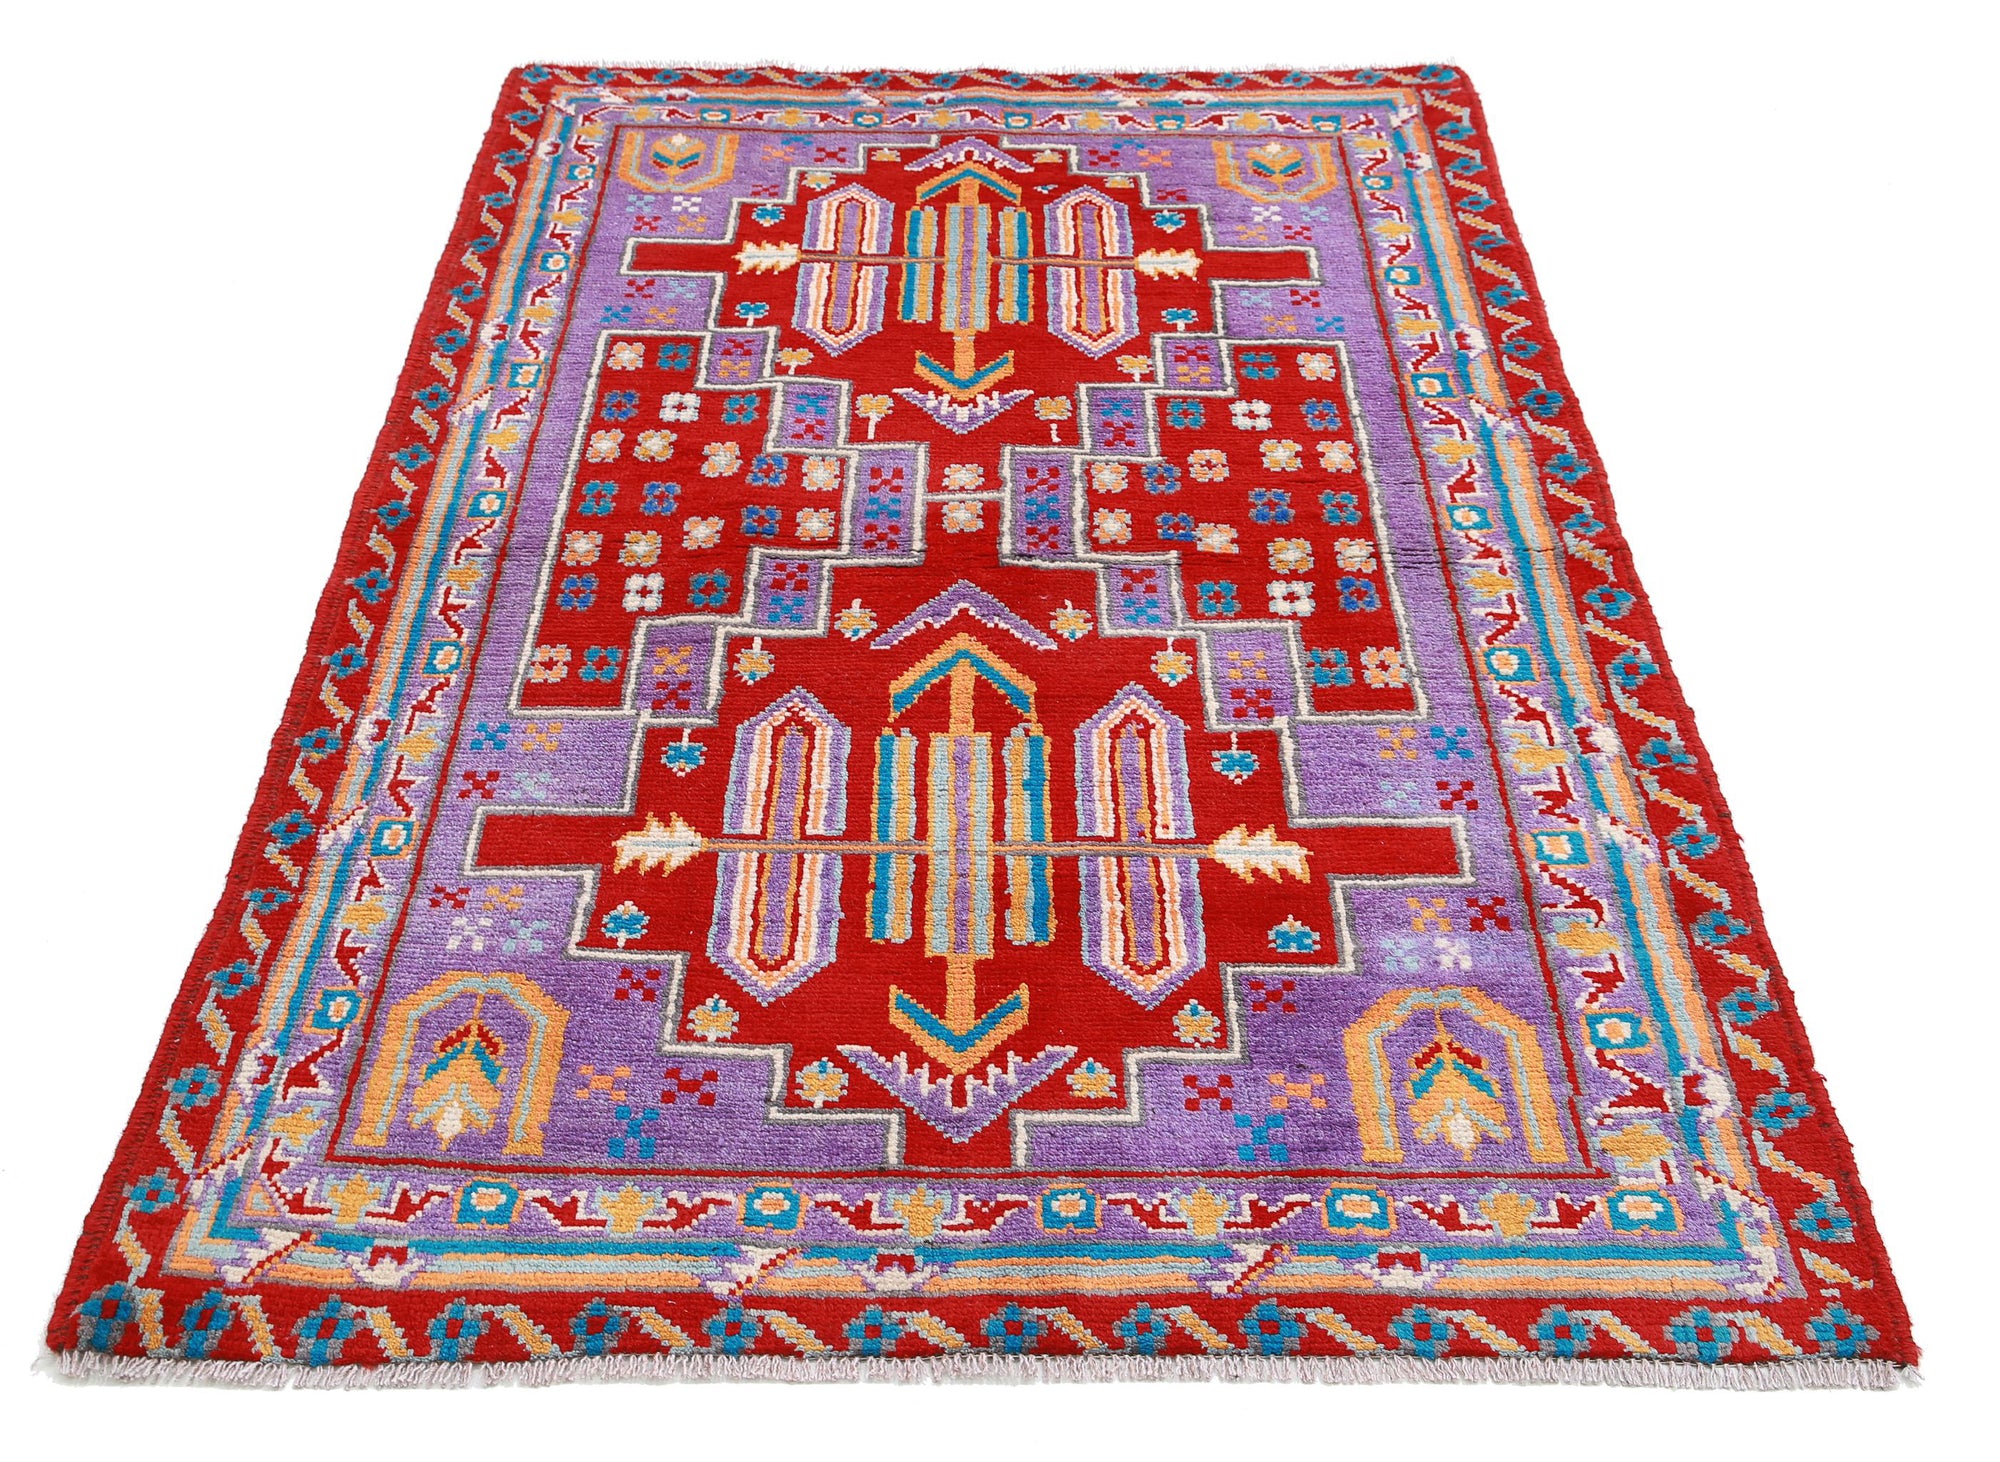 Revival-hand-knotted-qarghani-wool-rug-5014212-3.jpg